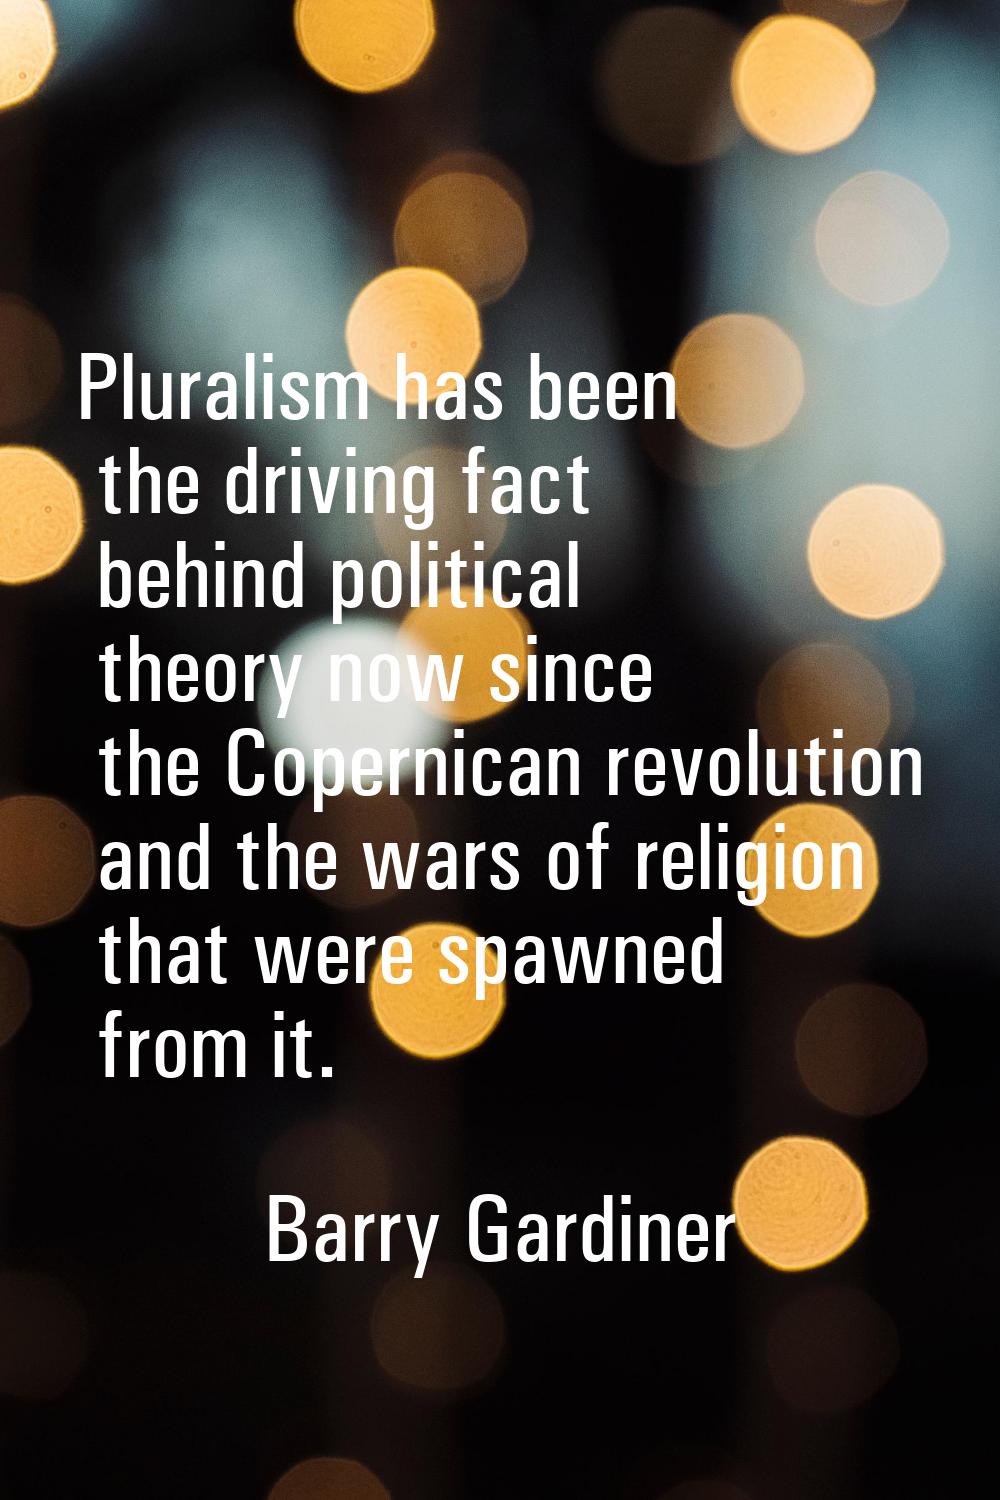 Pluralism has been the driving fact behind political theory now since the Copernican revolution and